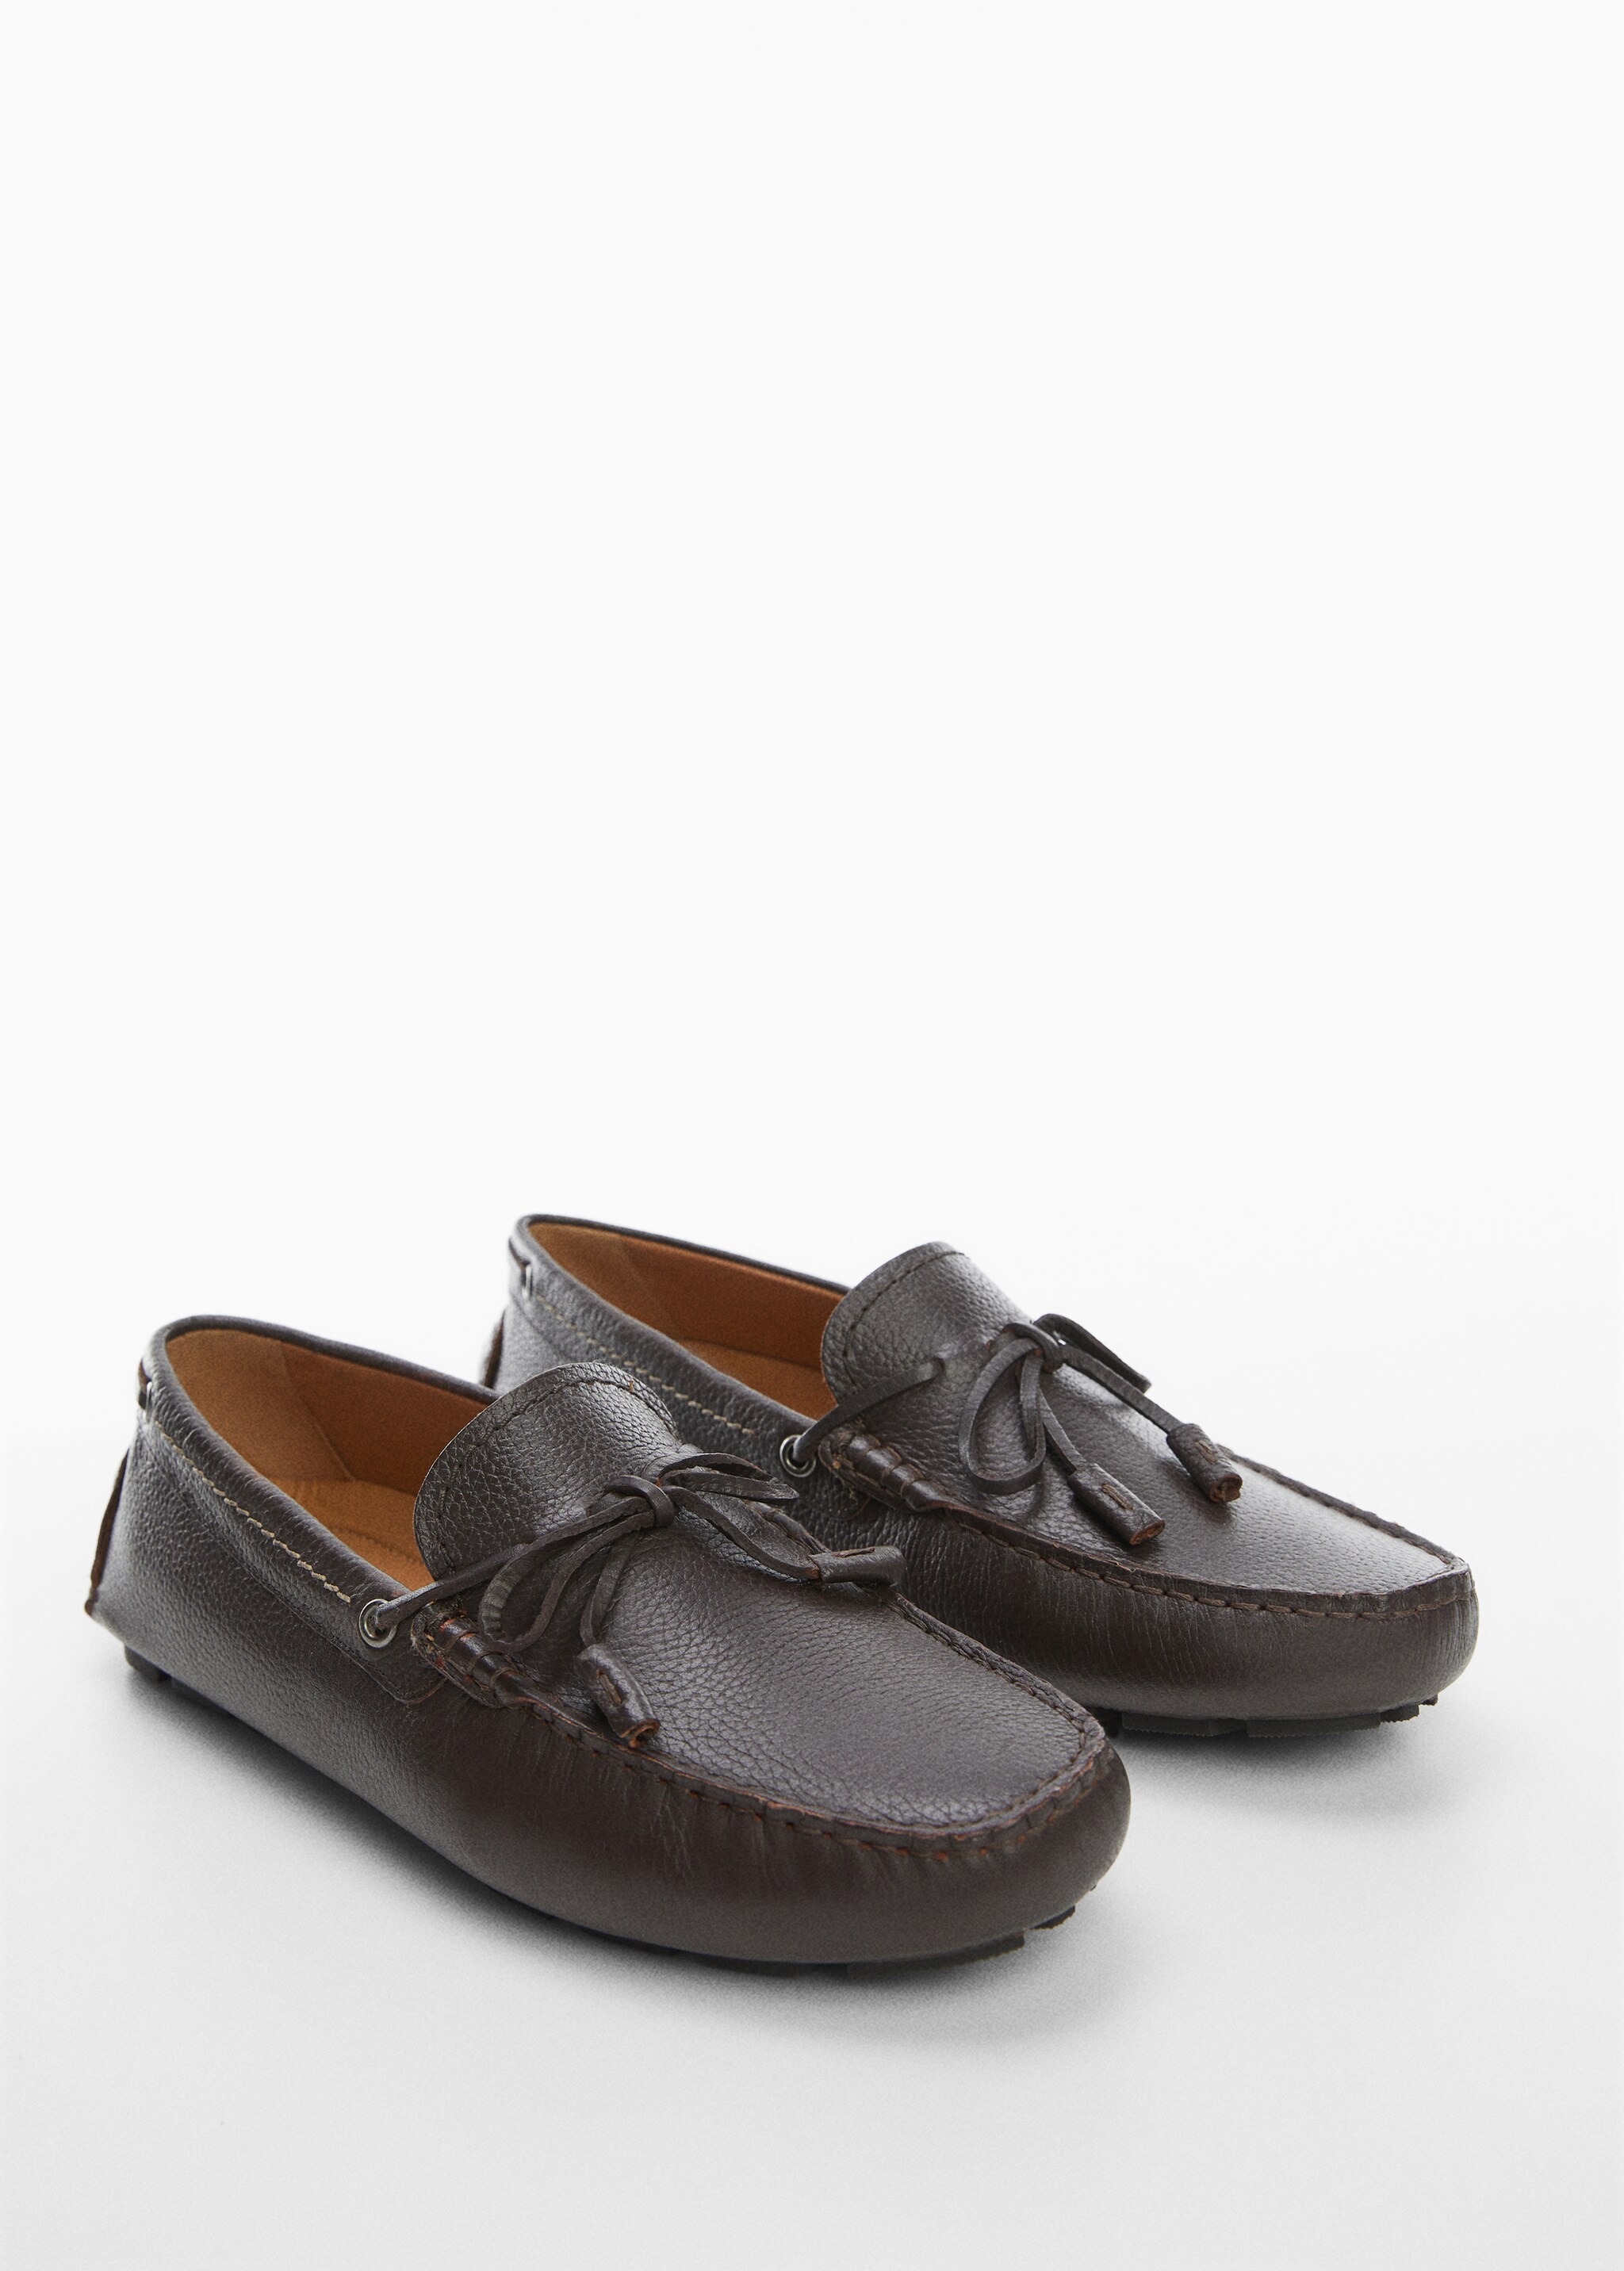 Leather loafers with tassels - Medium plane